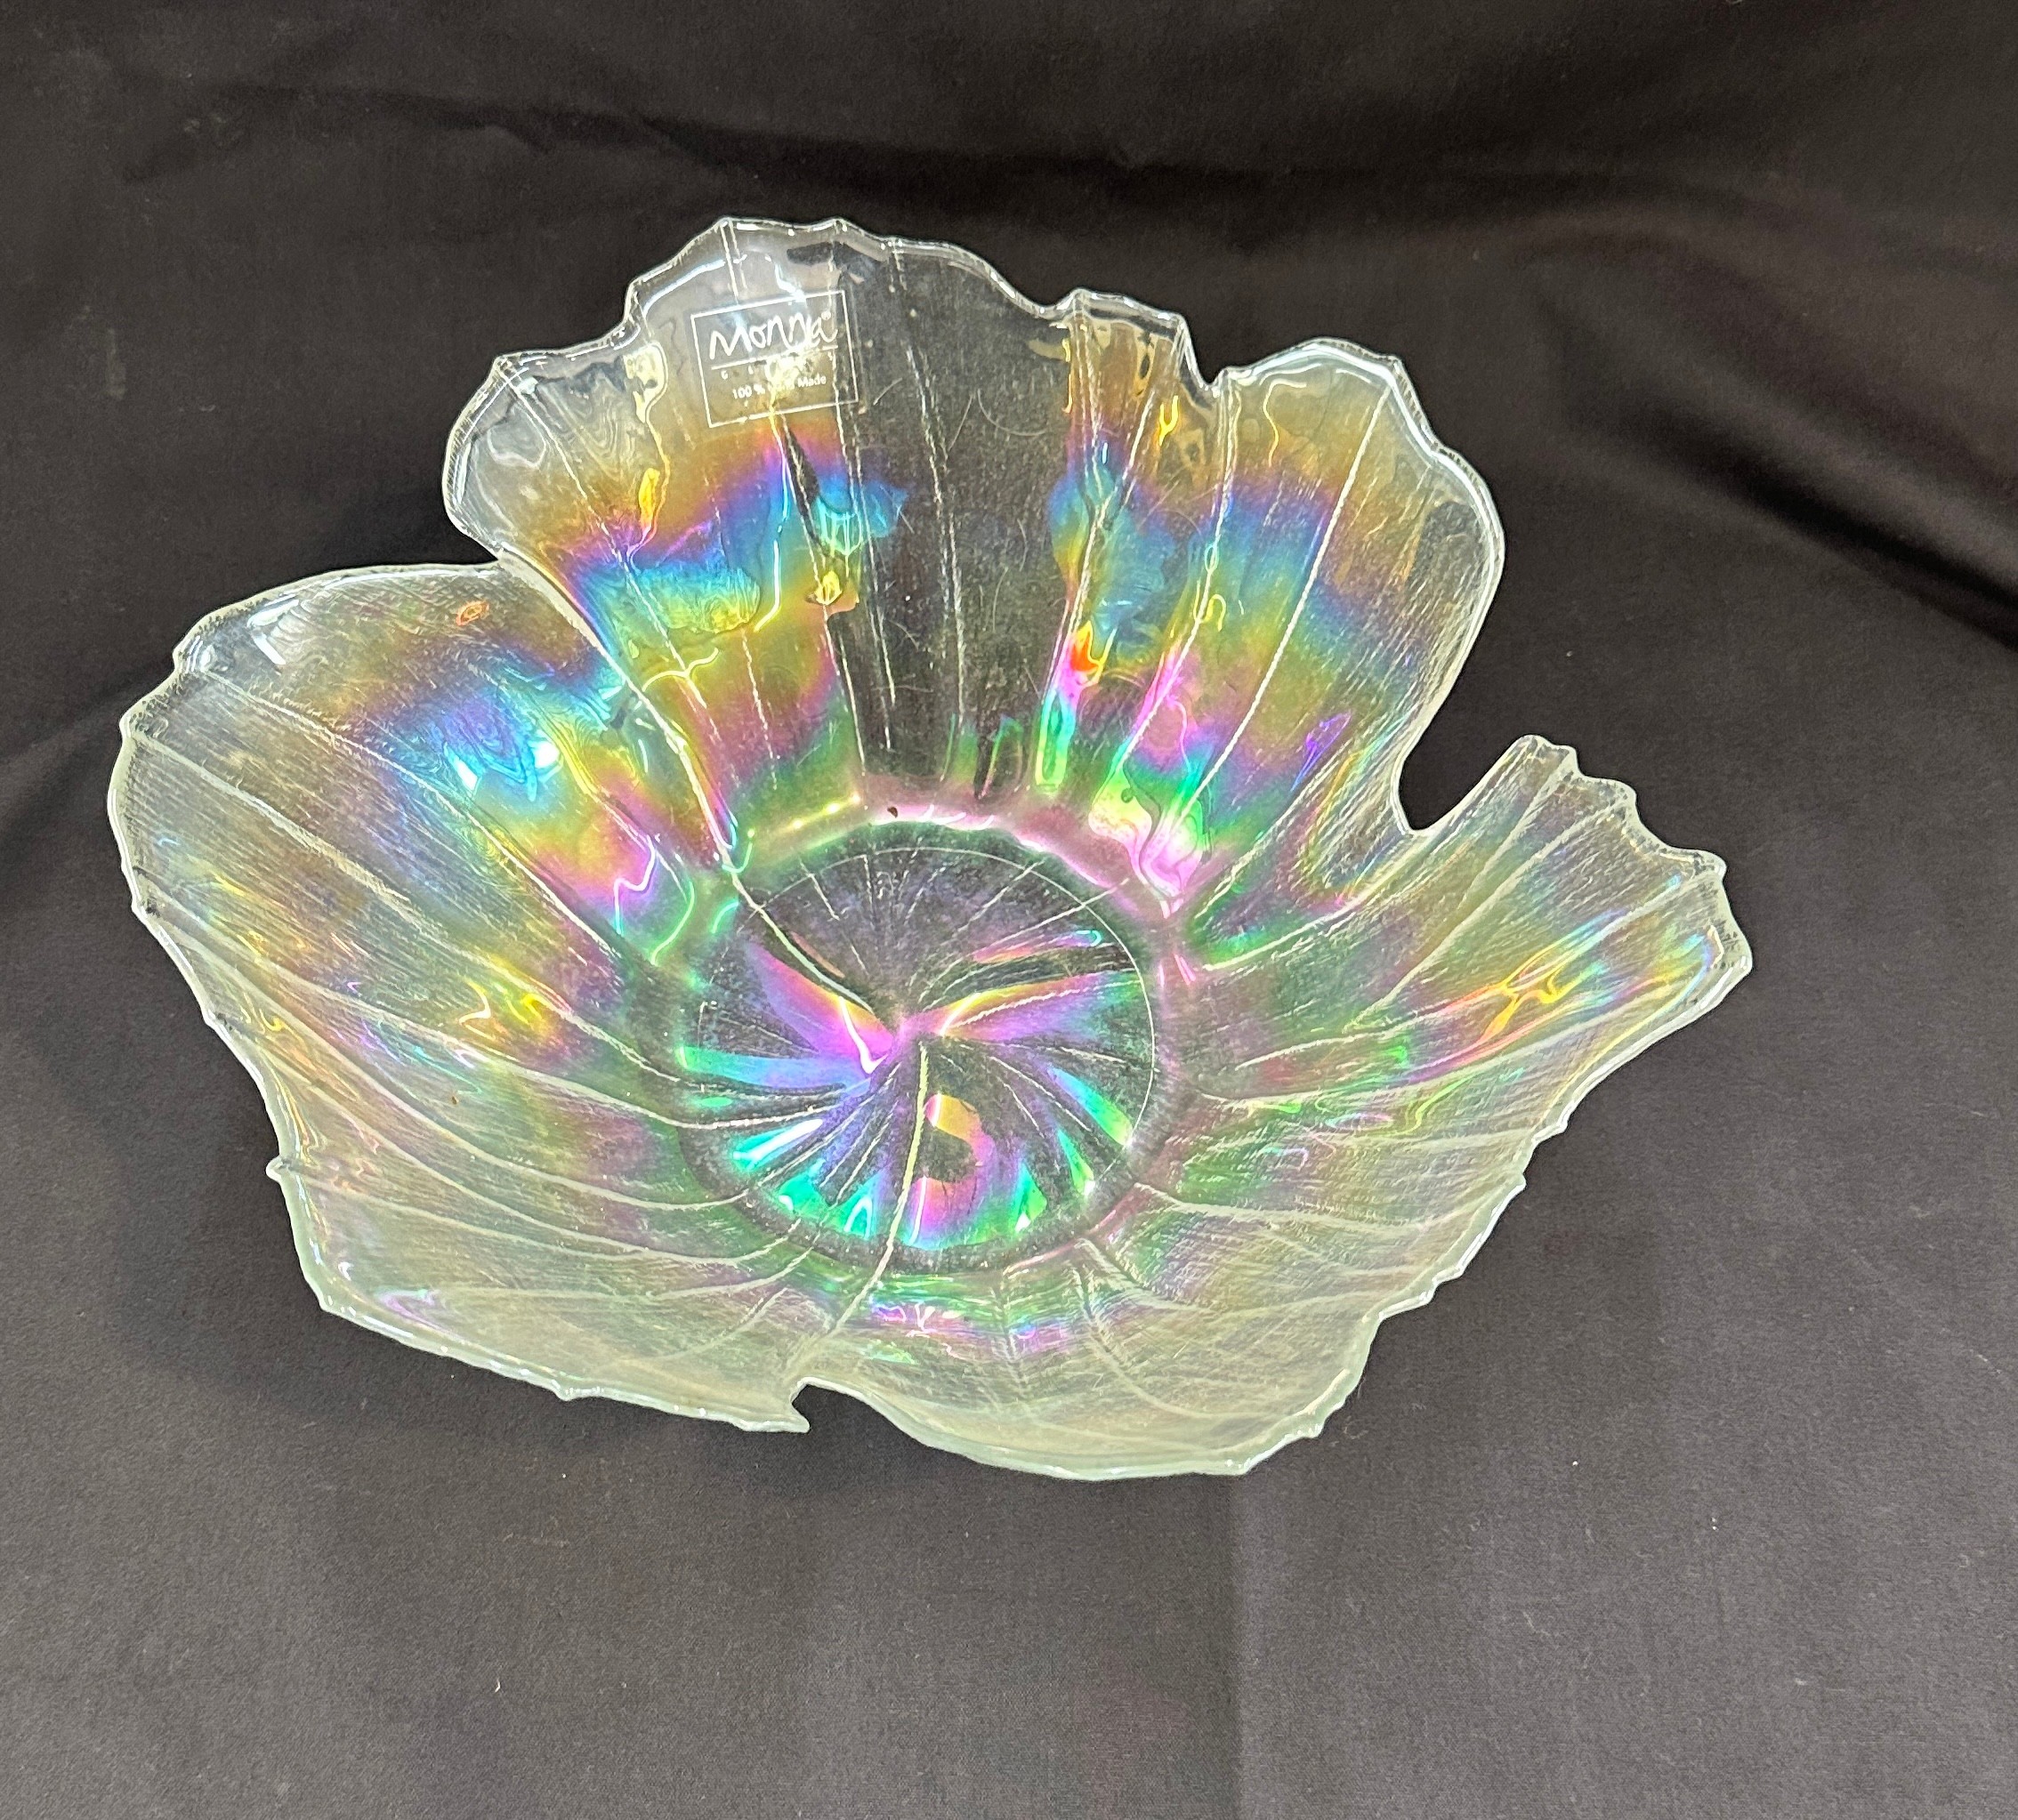 Large opalescent bowl 6 inches tall - Image 4 of 4